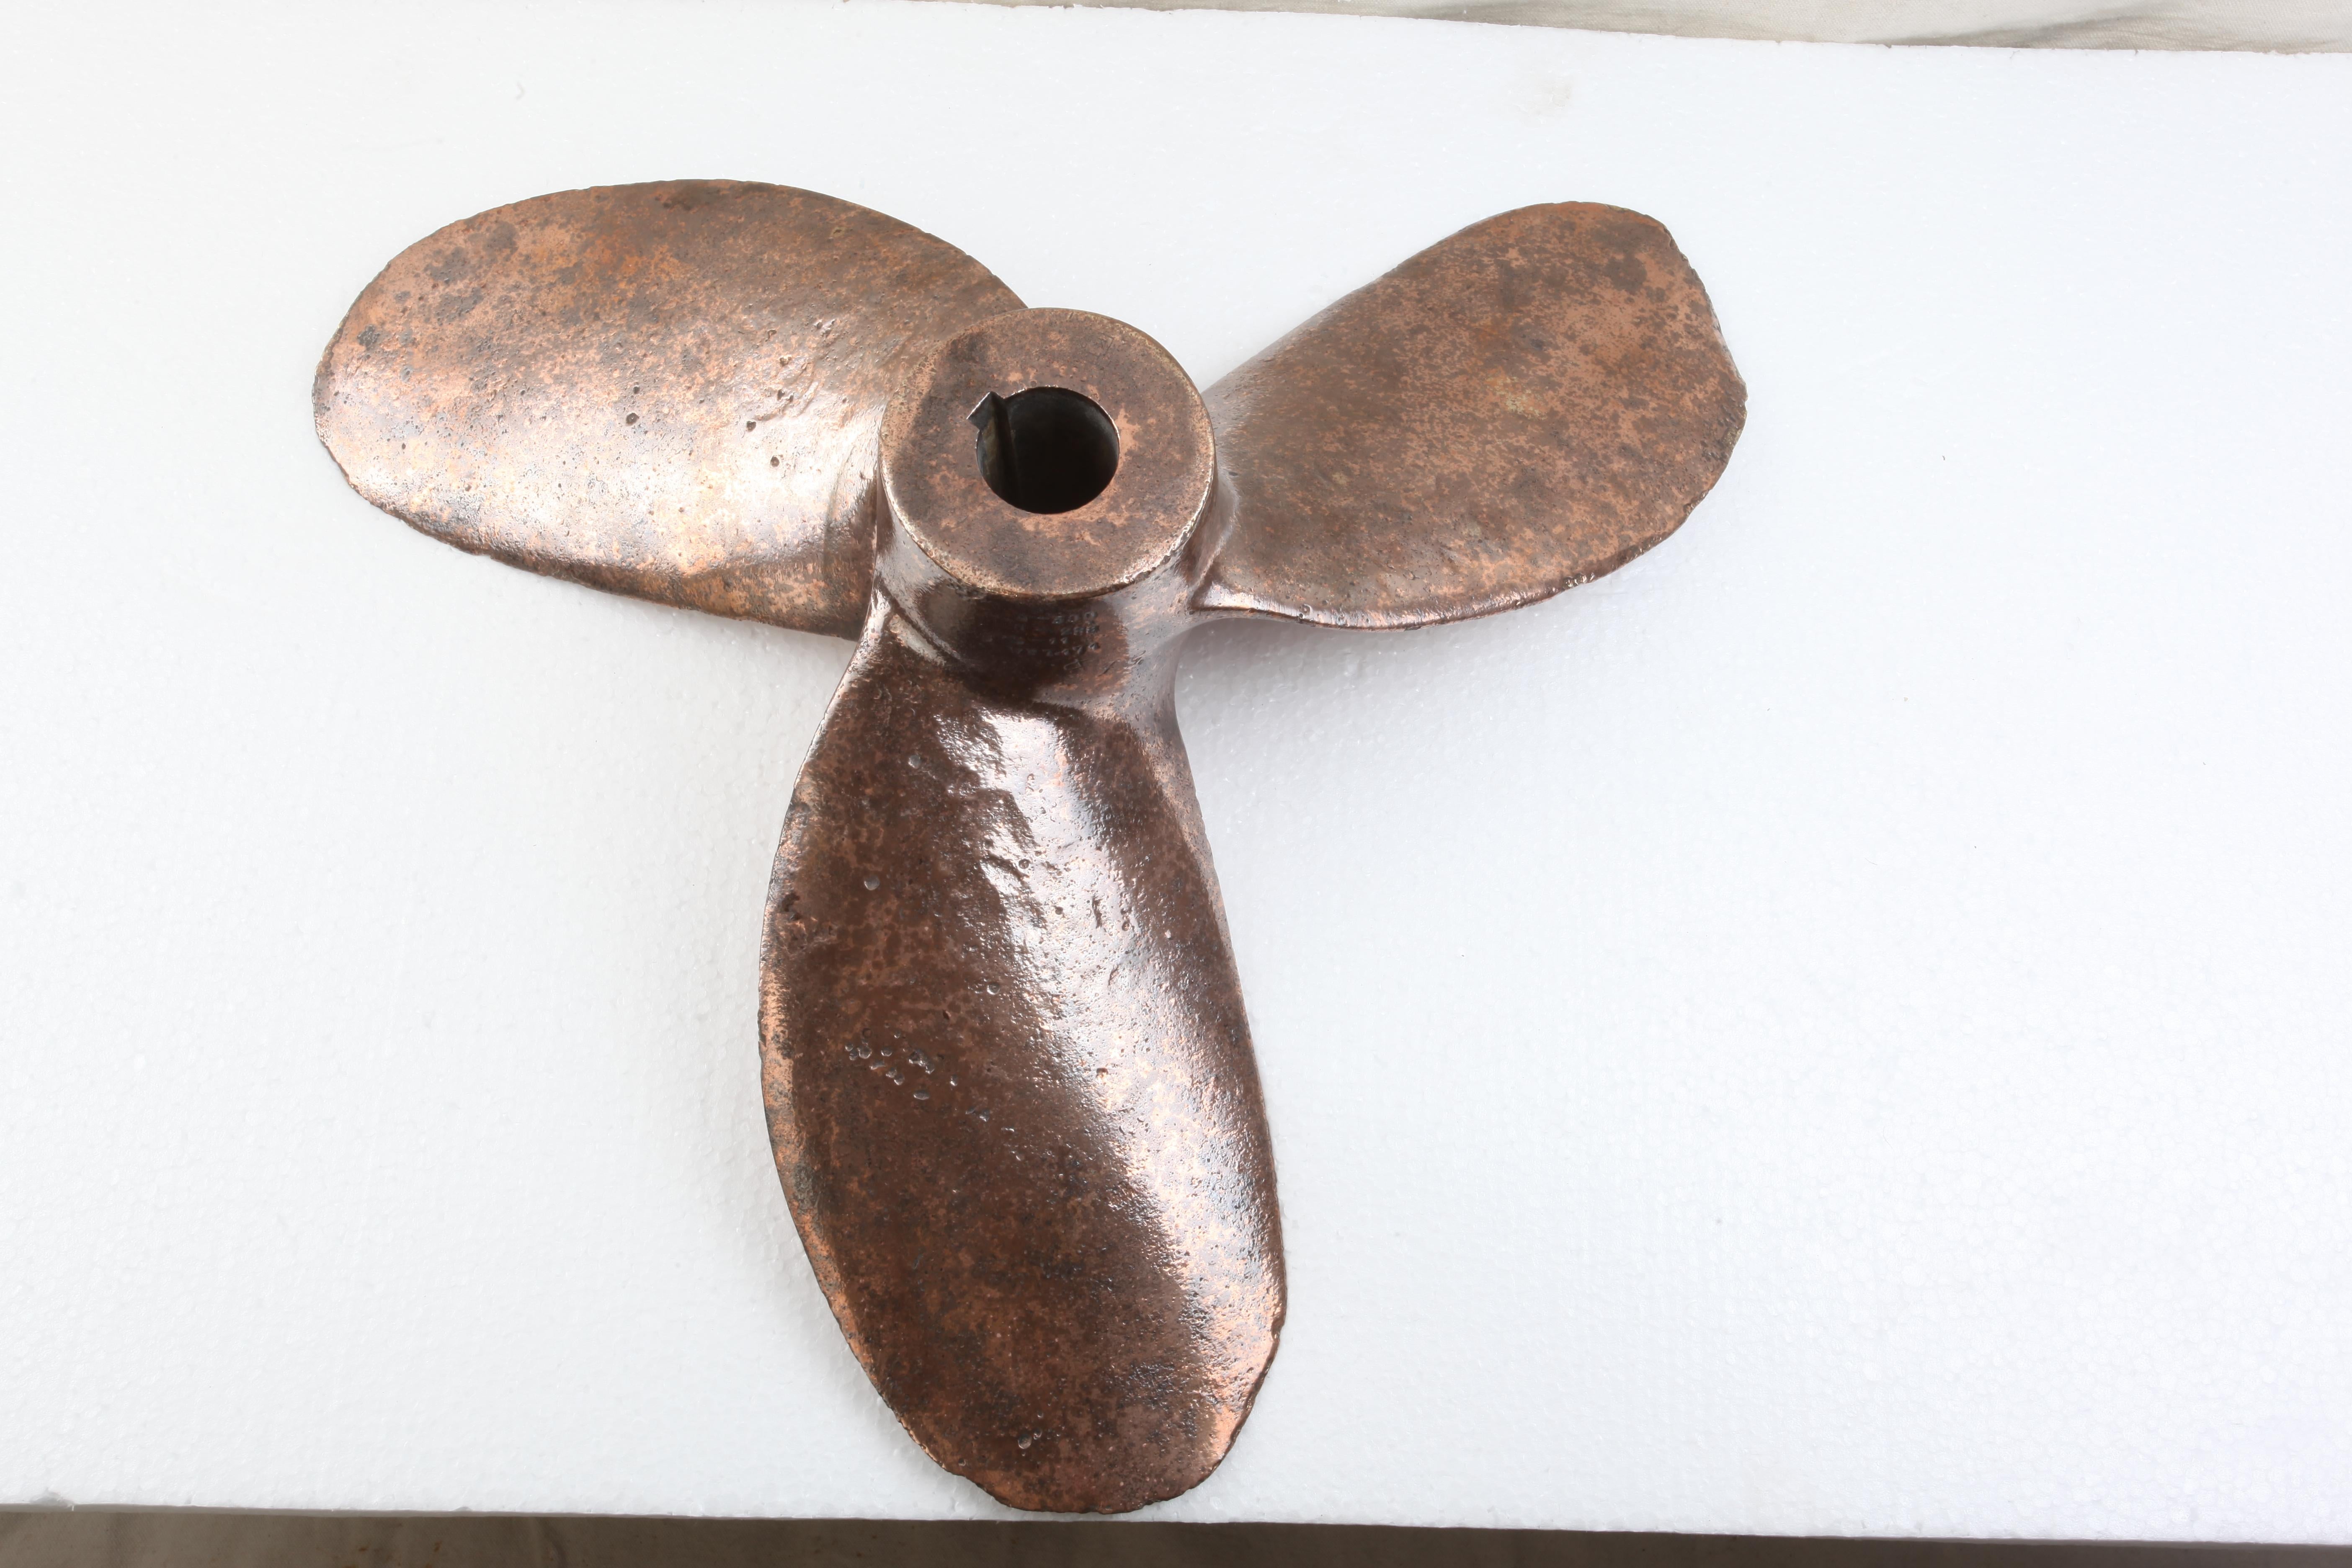 why are ship propellers made of bronze